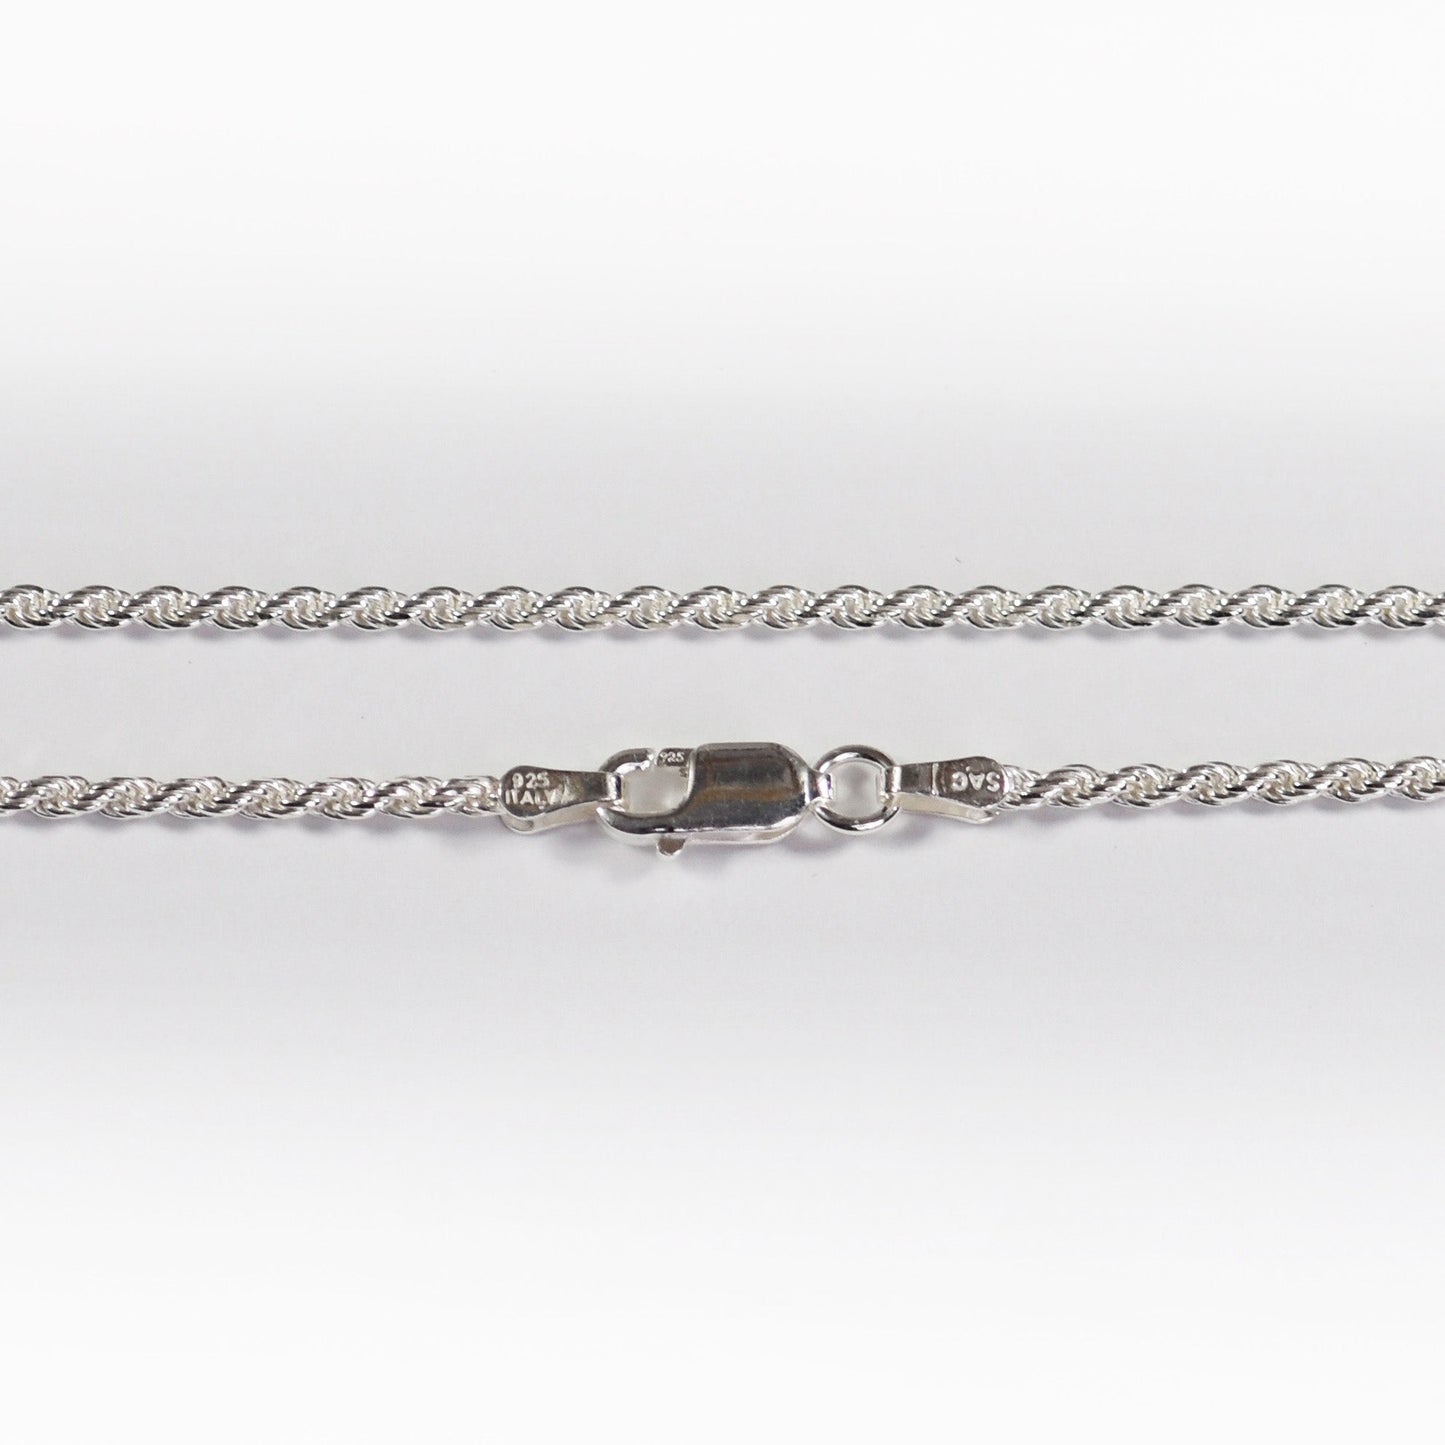 Rope Necklace - 1.7mm - Italian made Sterling Silver